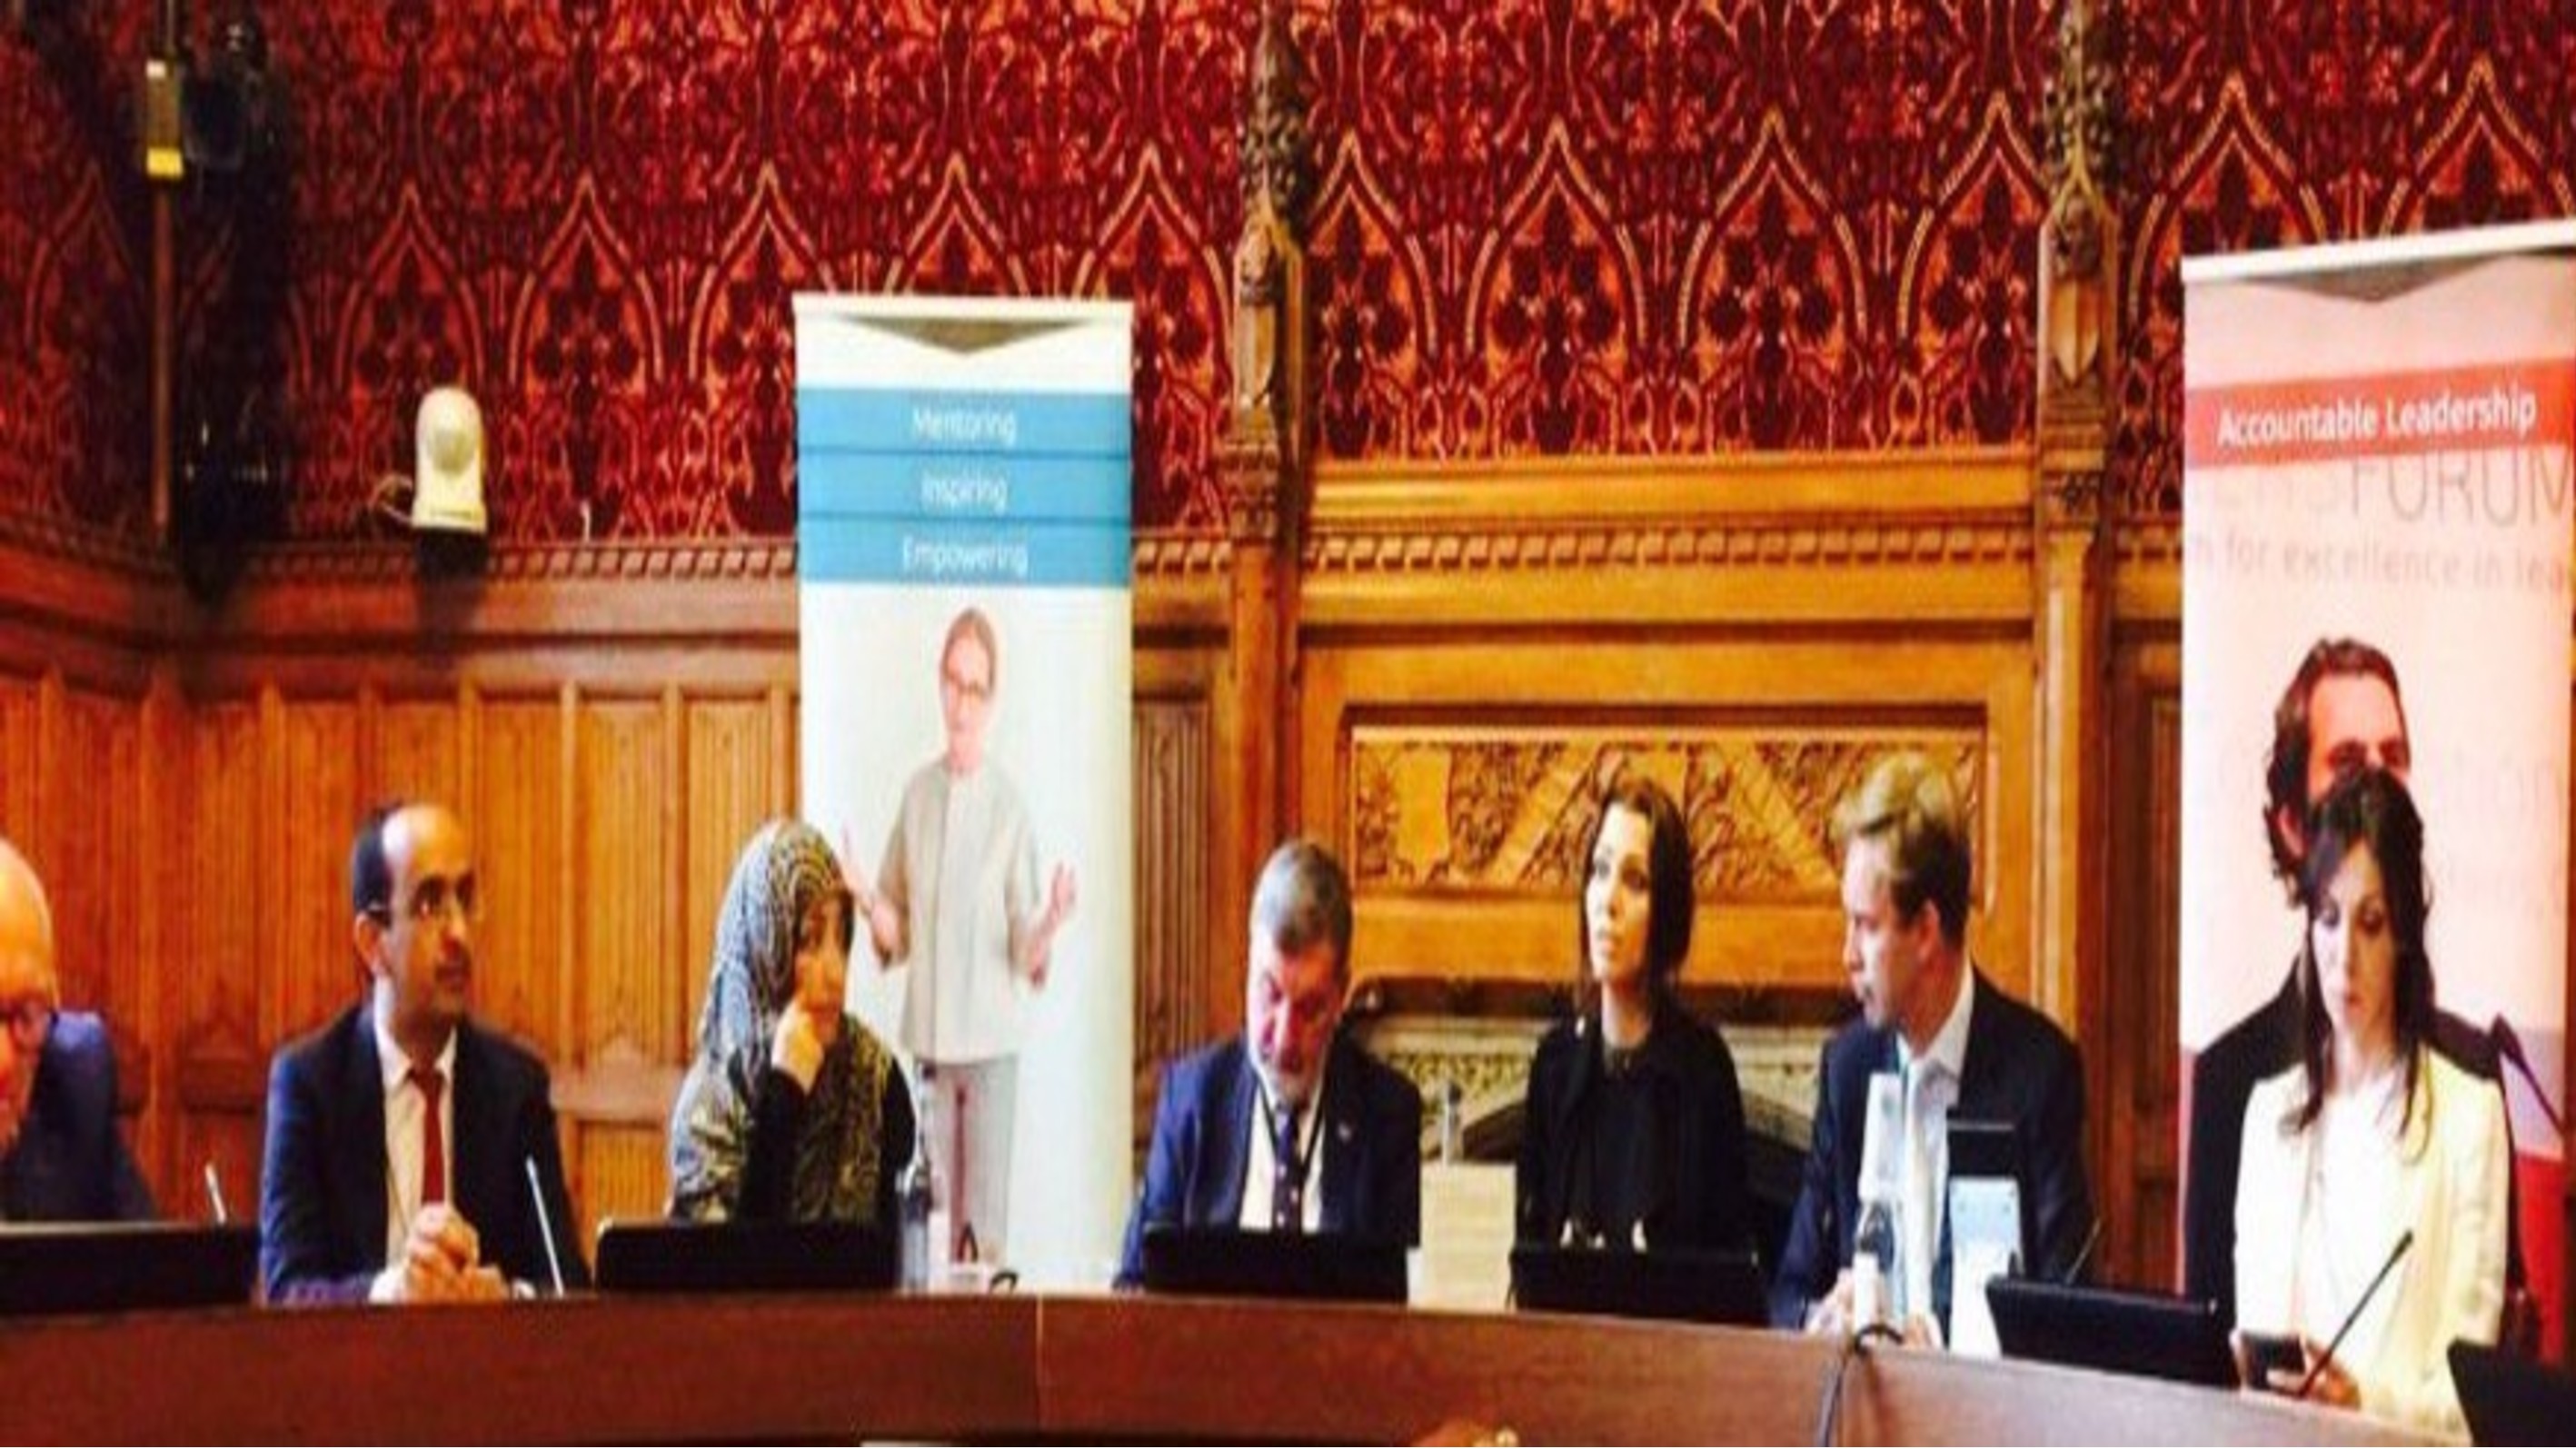 Mrs. Tawakkol Karman’s contribution at British House of Lords on Trust in Era of ‘Alternative’ Facts